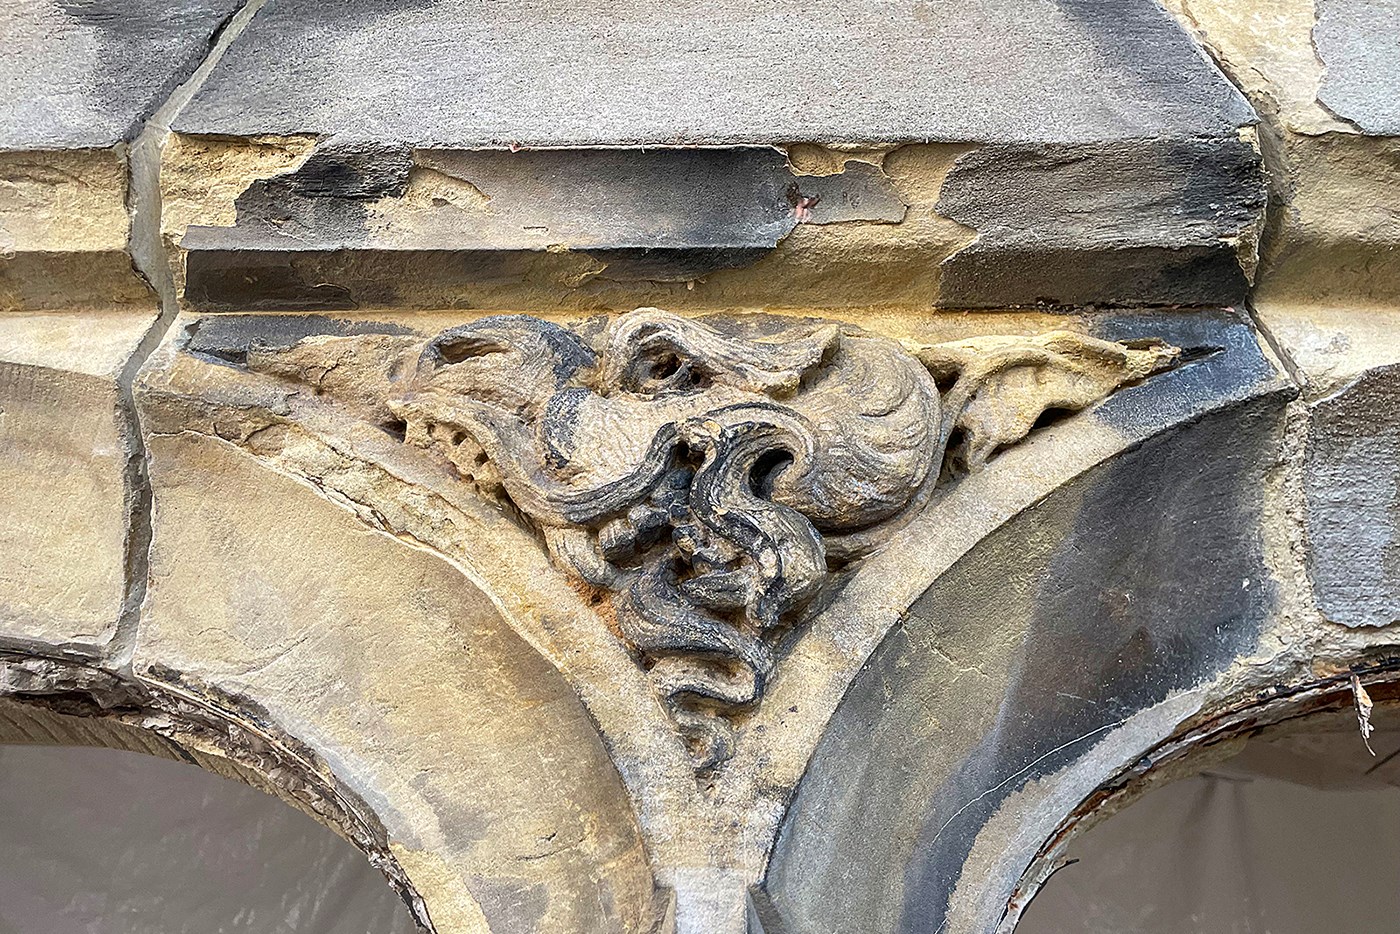 The original sculpture, on the east face of Centre Block, shows signs of a century of damage from weather and chemical erosion. (Photo credit: Decorative Arts Studio)